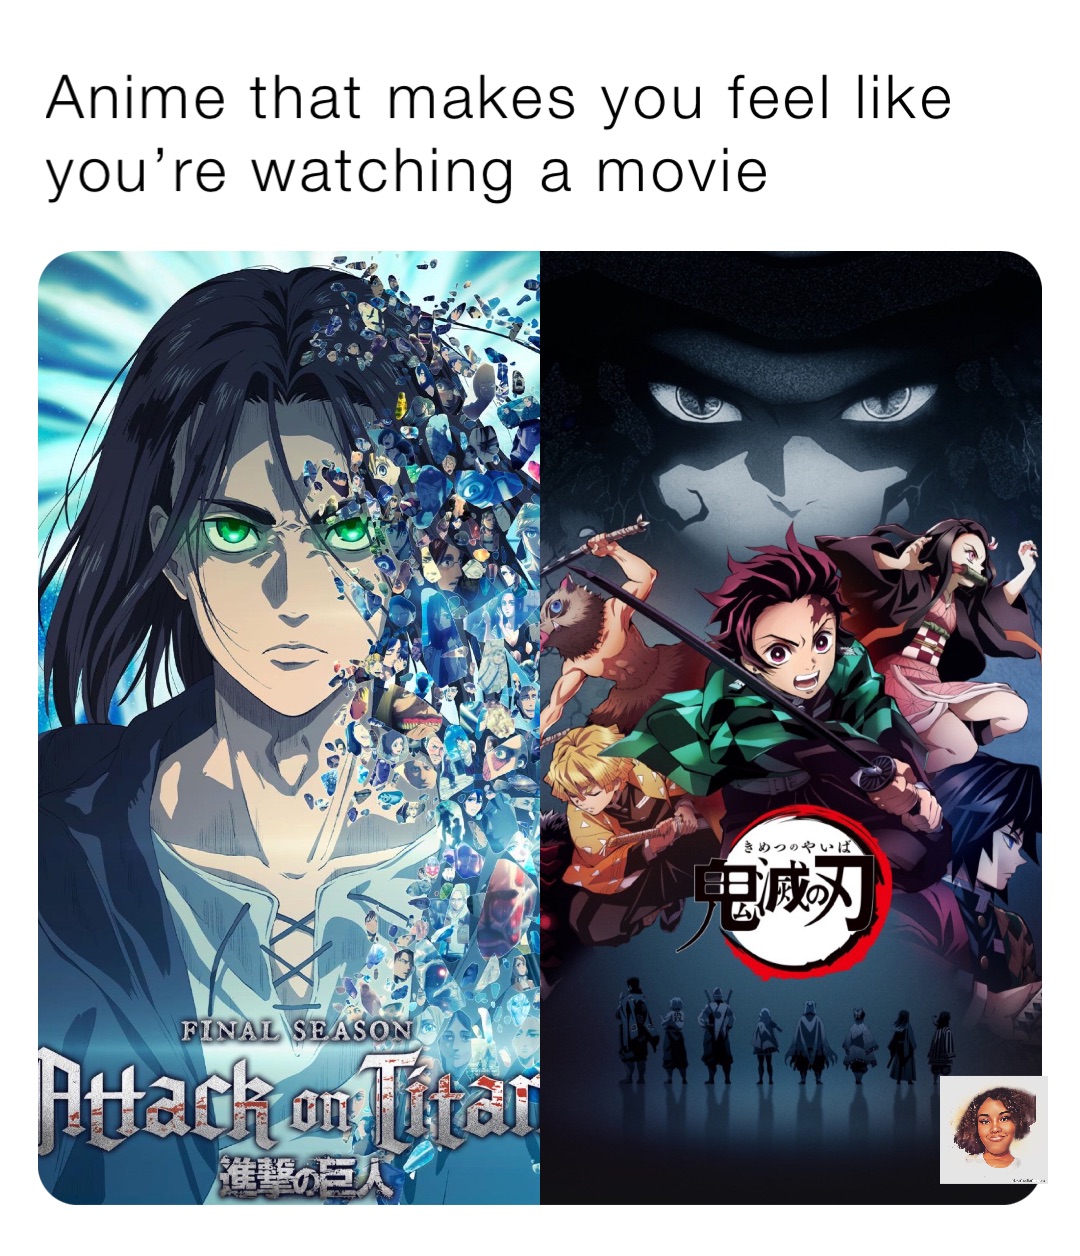 Anime that makes you feel like you’re watching a movie